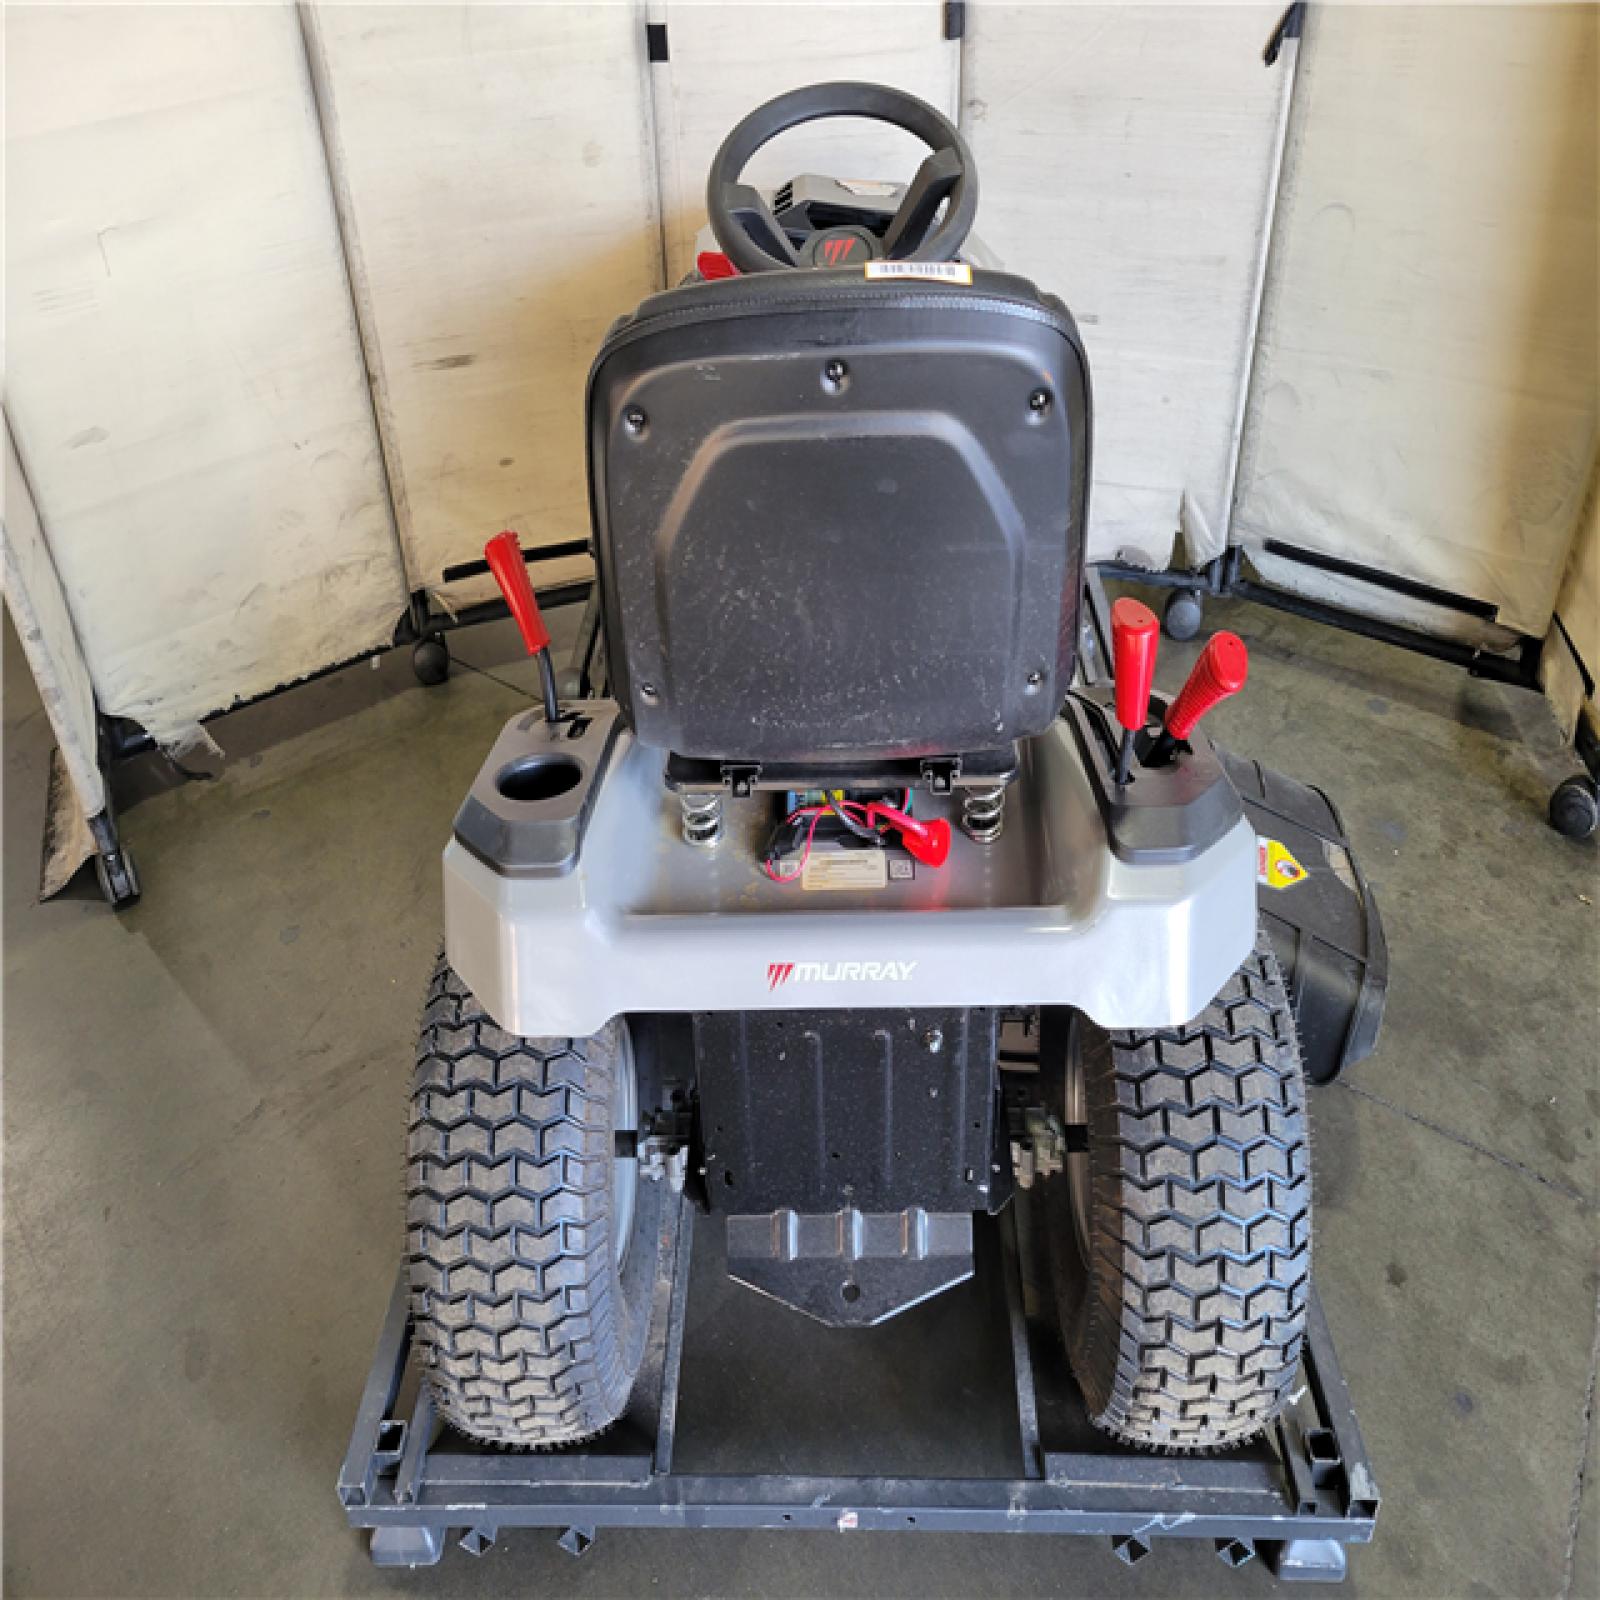 California AS-IS Murray MT200 42 in. 19.0 HP 540cc EX1900 Series Briggs and Stratton Engine Automatic Gas Riding Lawn Tractor Mower